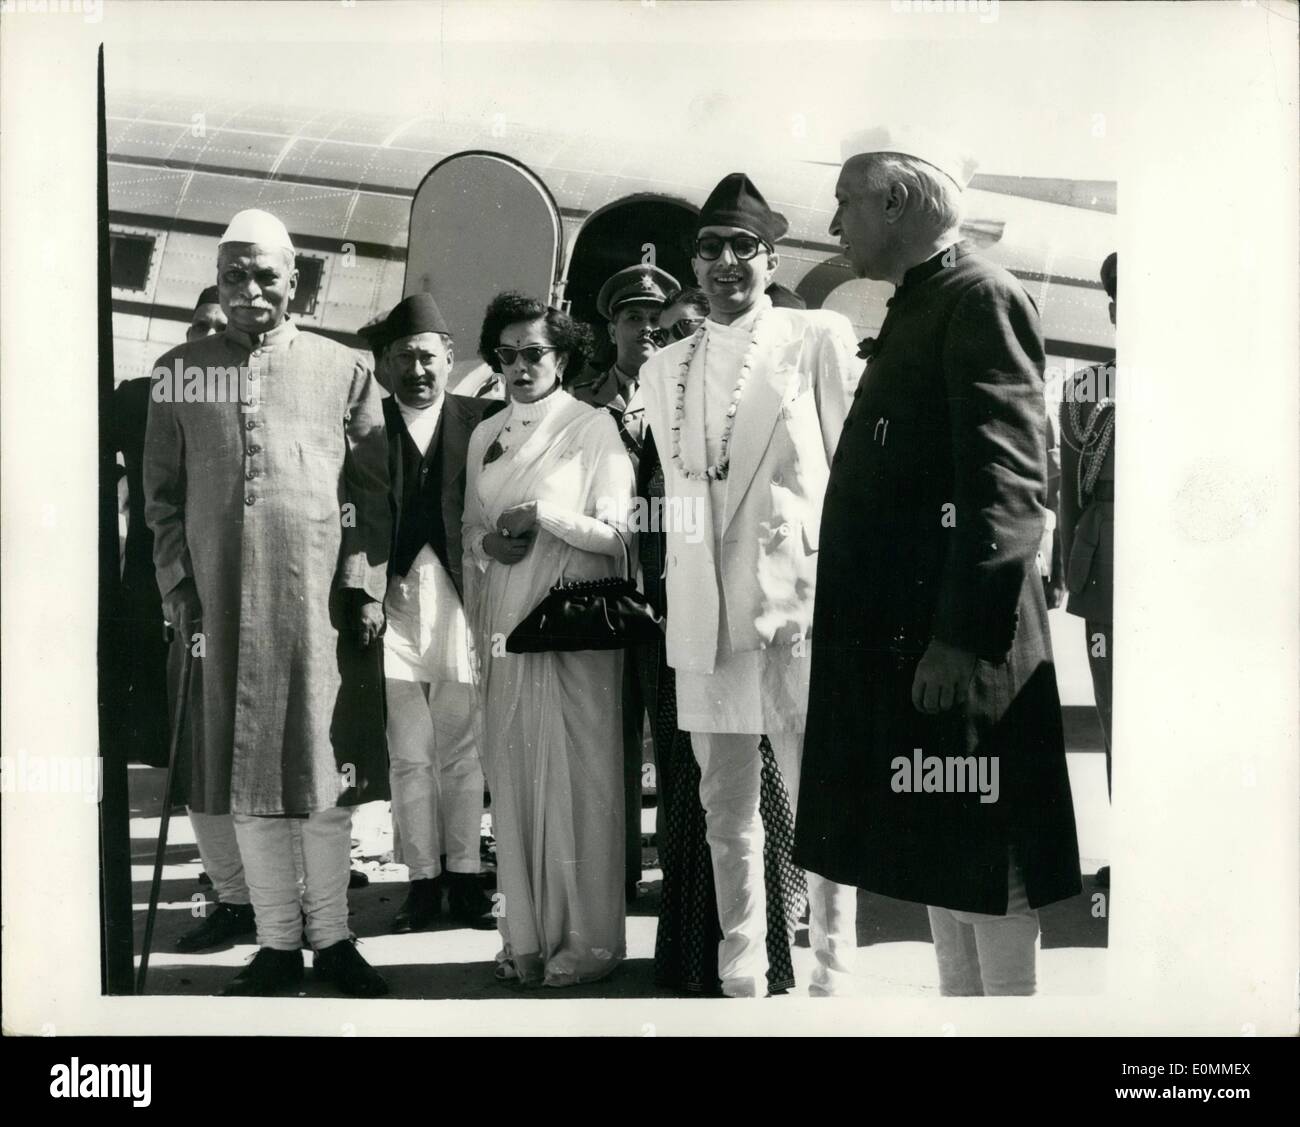 Nov. 09, 1955 - 9-11-55 King and Queen of Nepal on State visit to Delhi greeted by President. Dr. Rajendra Prasad, the President of India wen to Palam Airport, Delhi recently to greet King Mahendra and the Queen of Nepal, who arrived on a State visit to India. The Royal guests travelled to Delhi in the President's Dakota aircraft. Keystone Photo Shows: The group at the airport, seen left to right: Dr. Rajendra Prasad the Indian President; Queen of Nepal; Mrs. Indira Gandhi, daughter of Mr. Nehru; King Mahendra and Mr. Nehru. Stock Photo